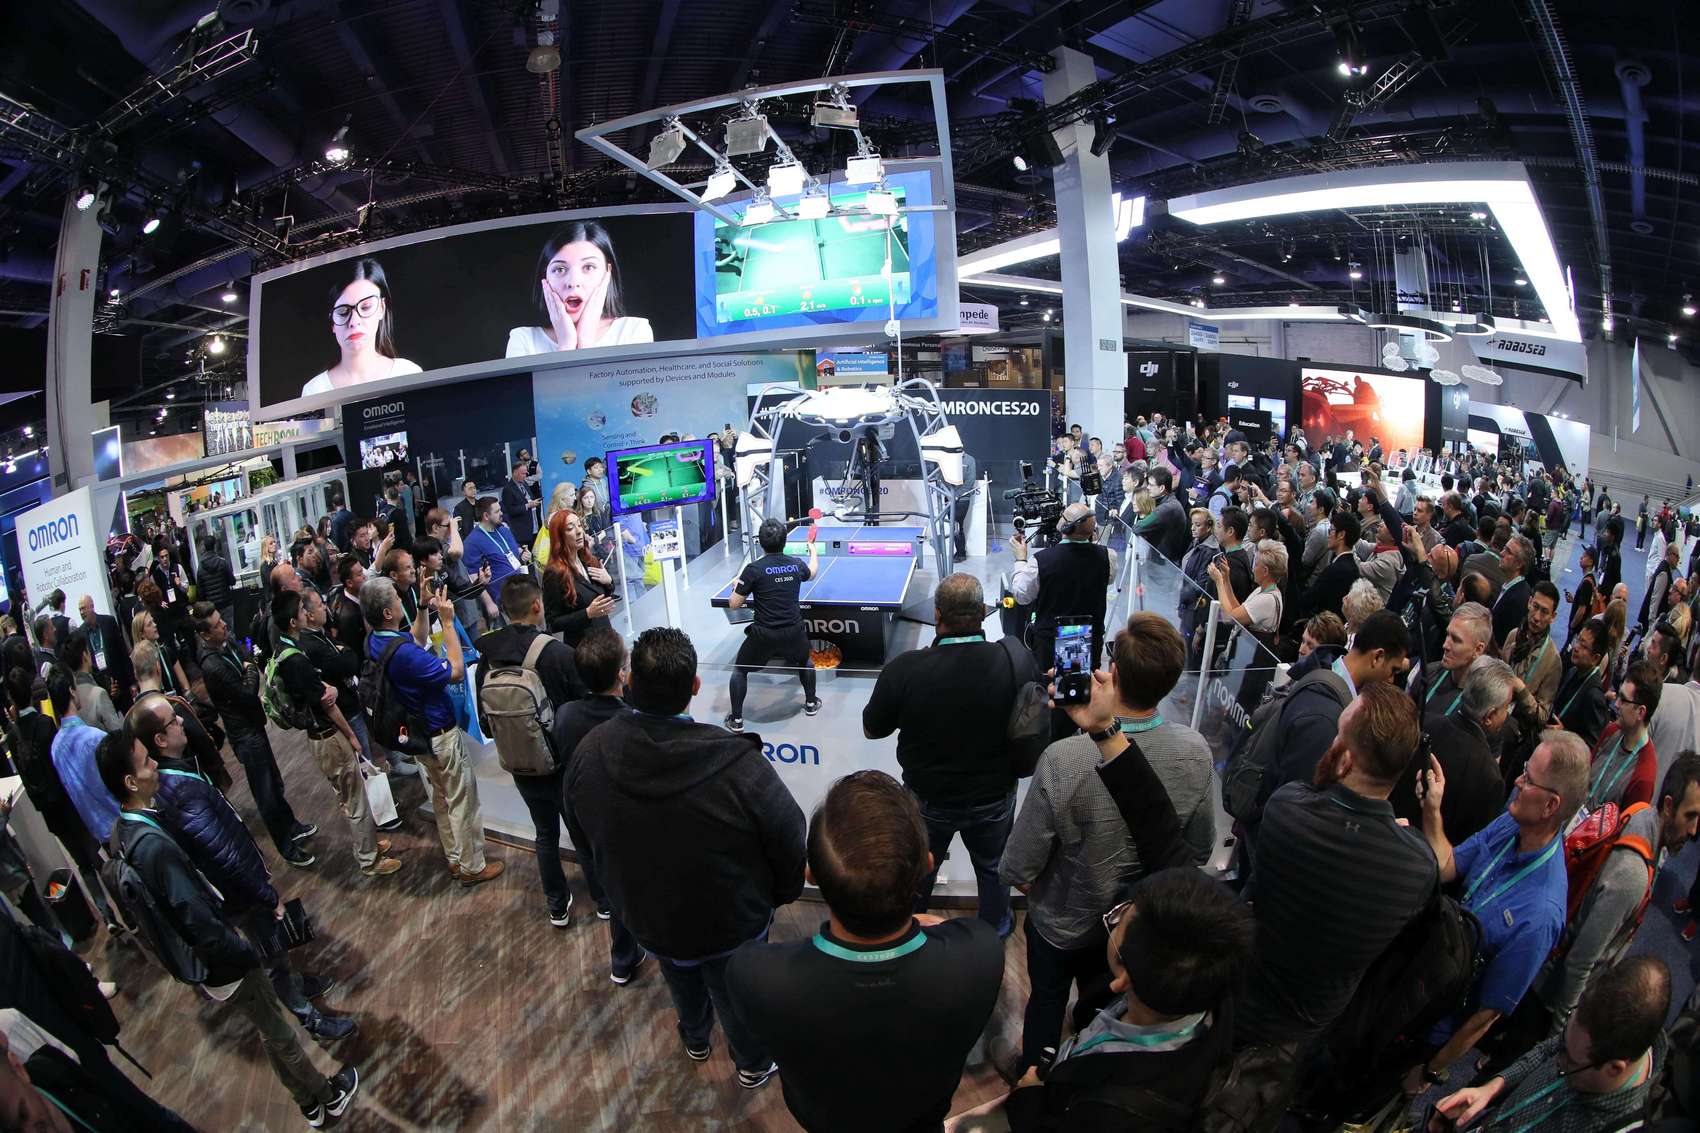 5G and IoT trends at CES